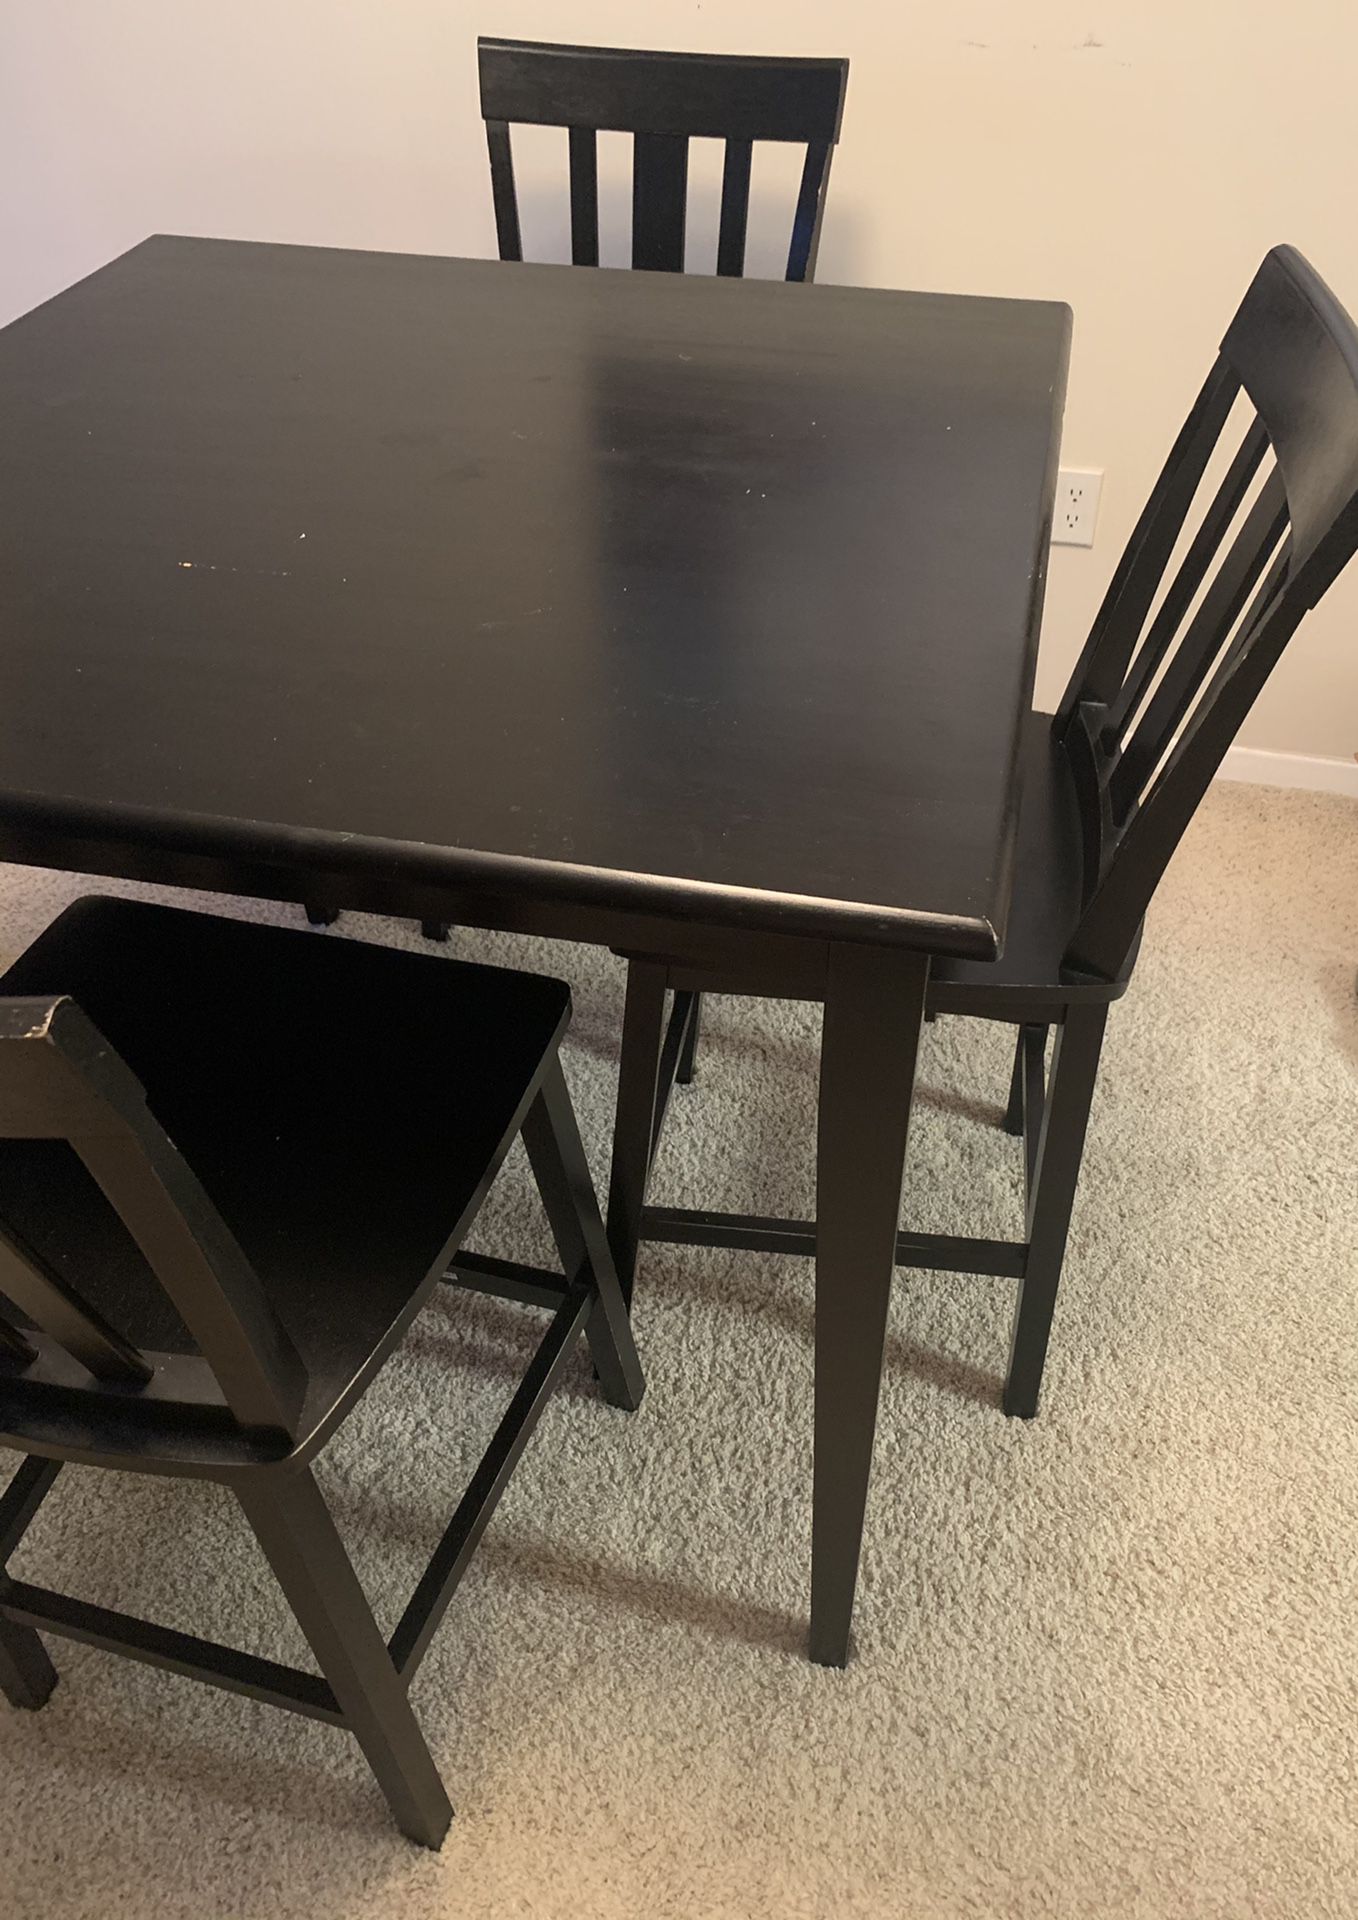 5 piece dining set- black high top table with 4 chairs